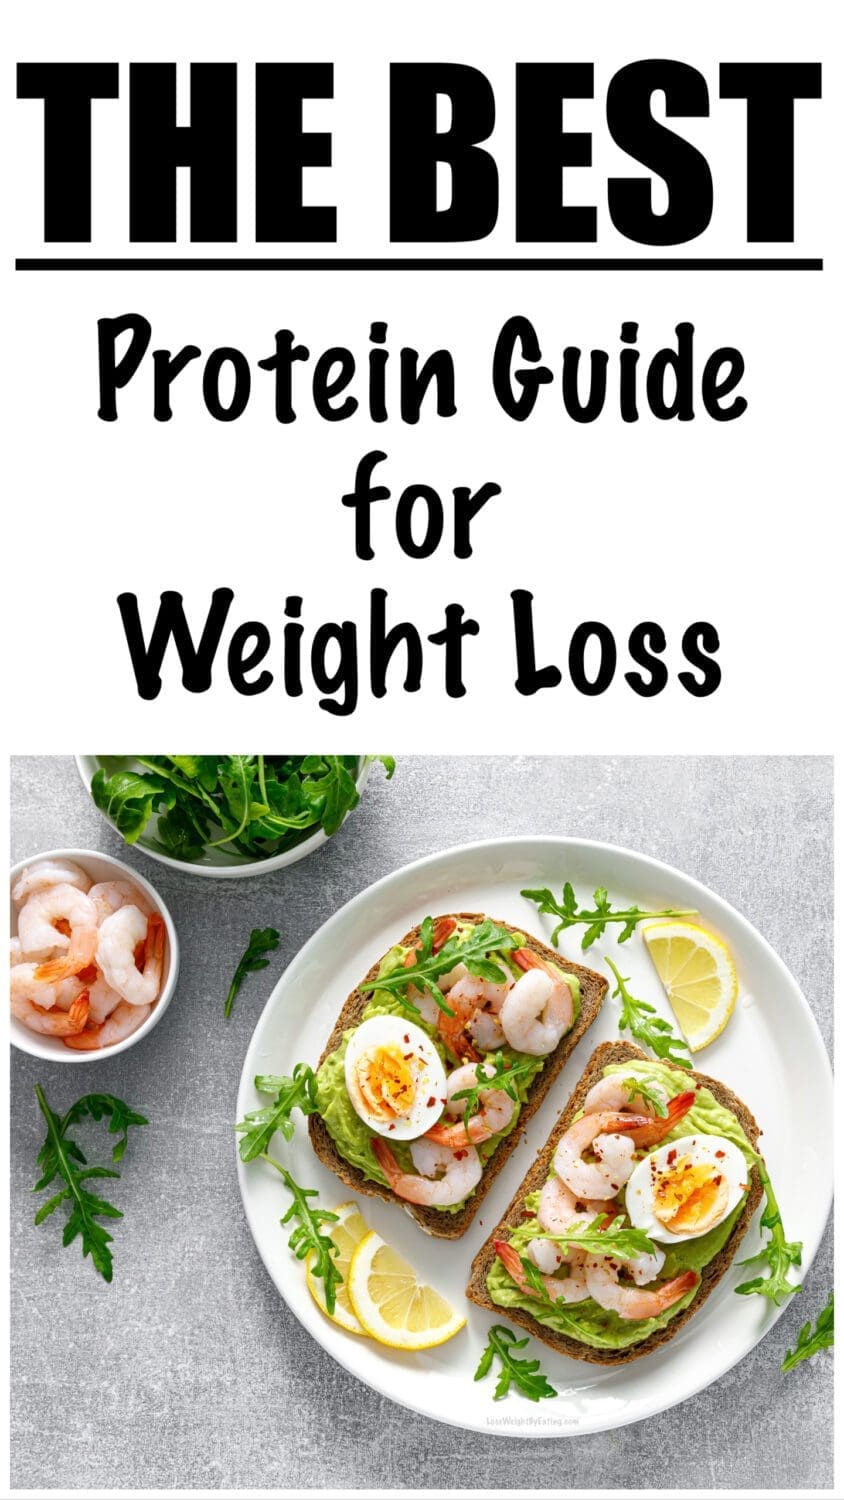 How Much Protein Do You Need to Lose Weight?